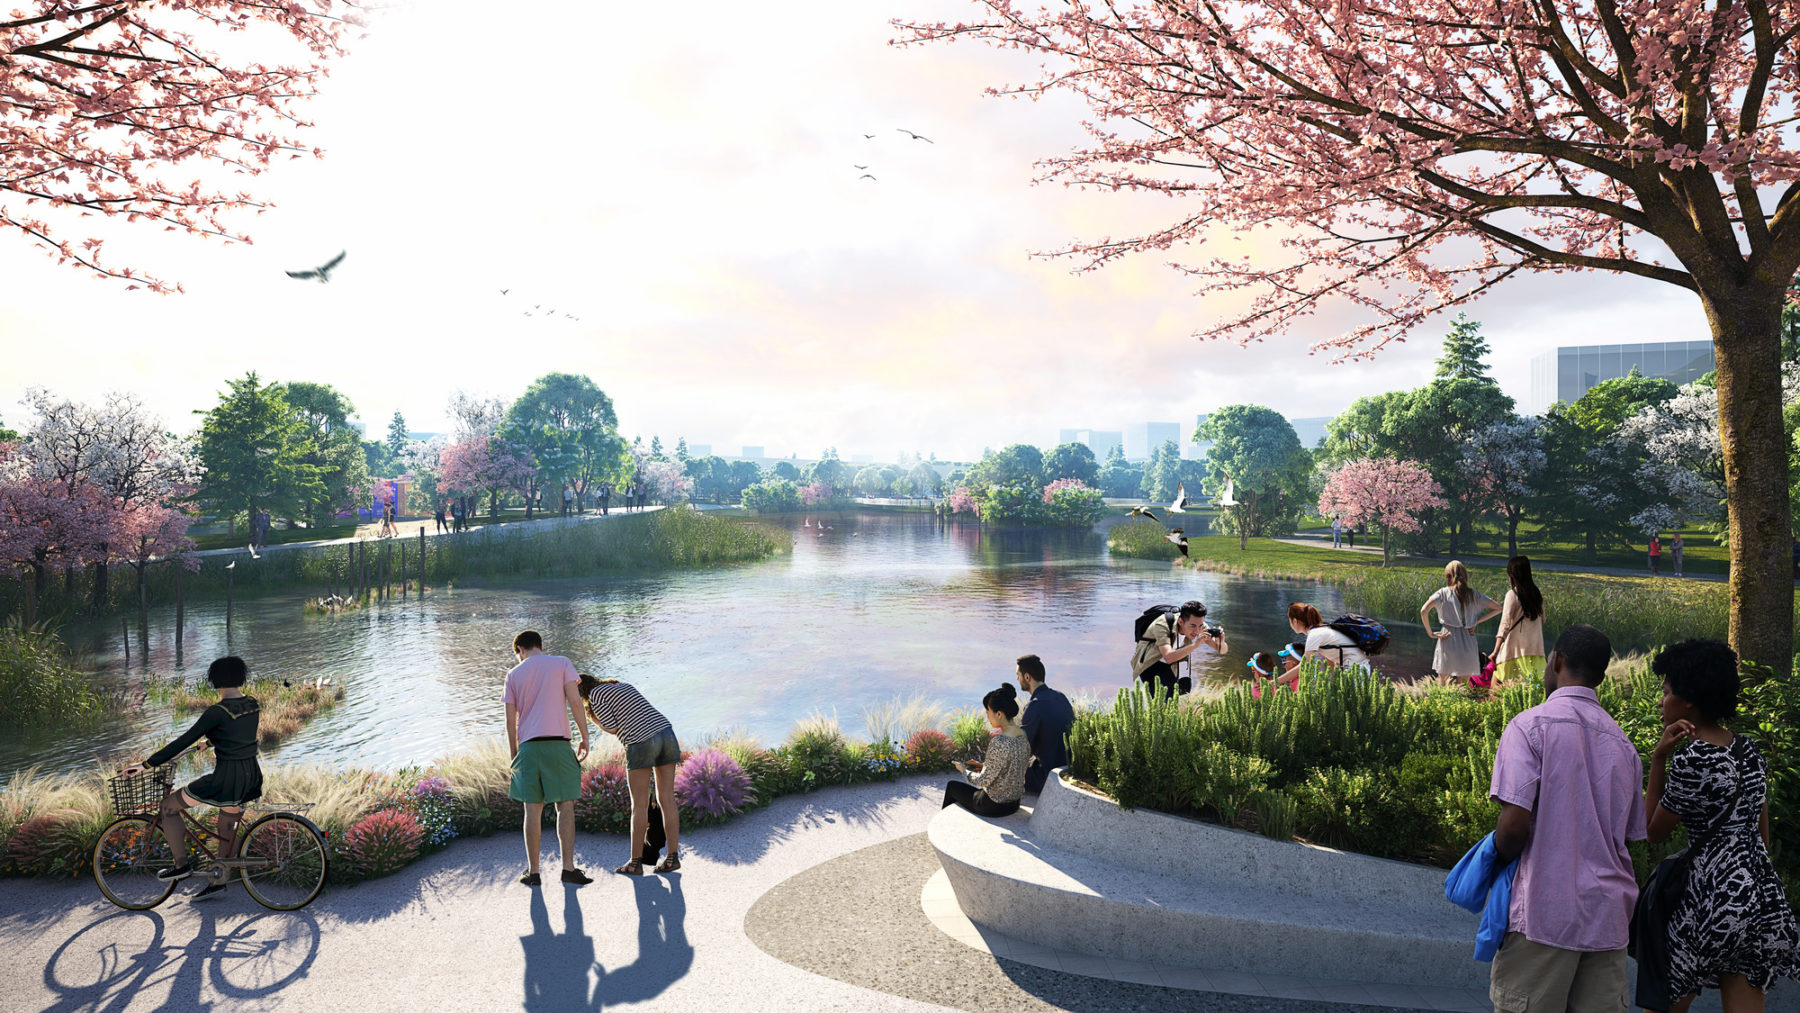 Ground level rendering of path along the lake. A woman rides a bike and other visitors look out over the water.